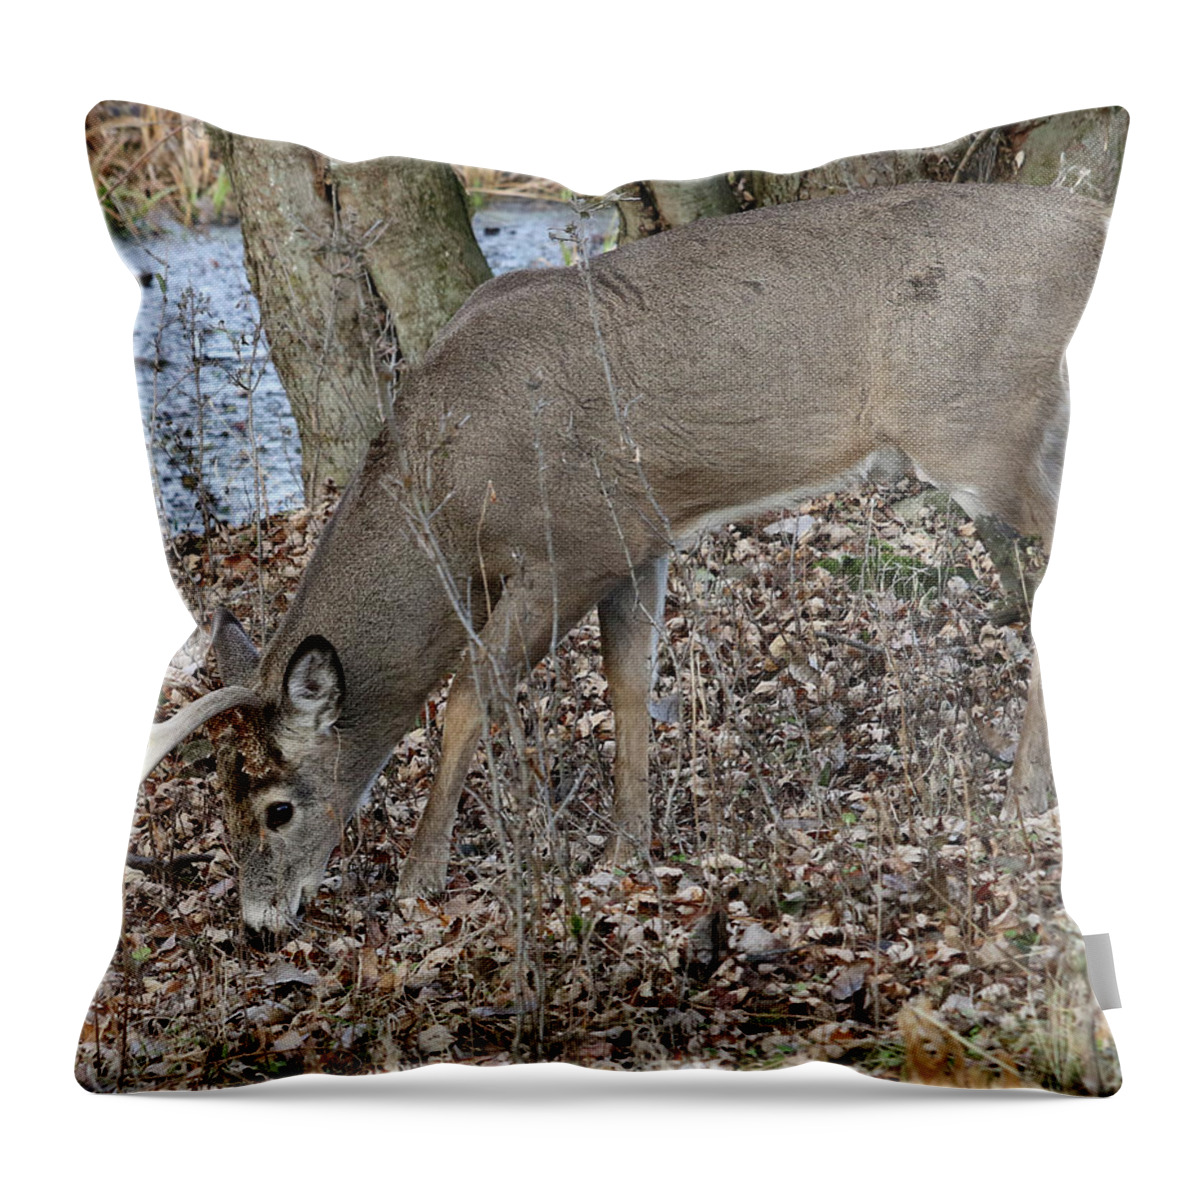 White-tailed Deer Throw Pillow featuring the photograph Beautiful Stag by Doris Potter